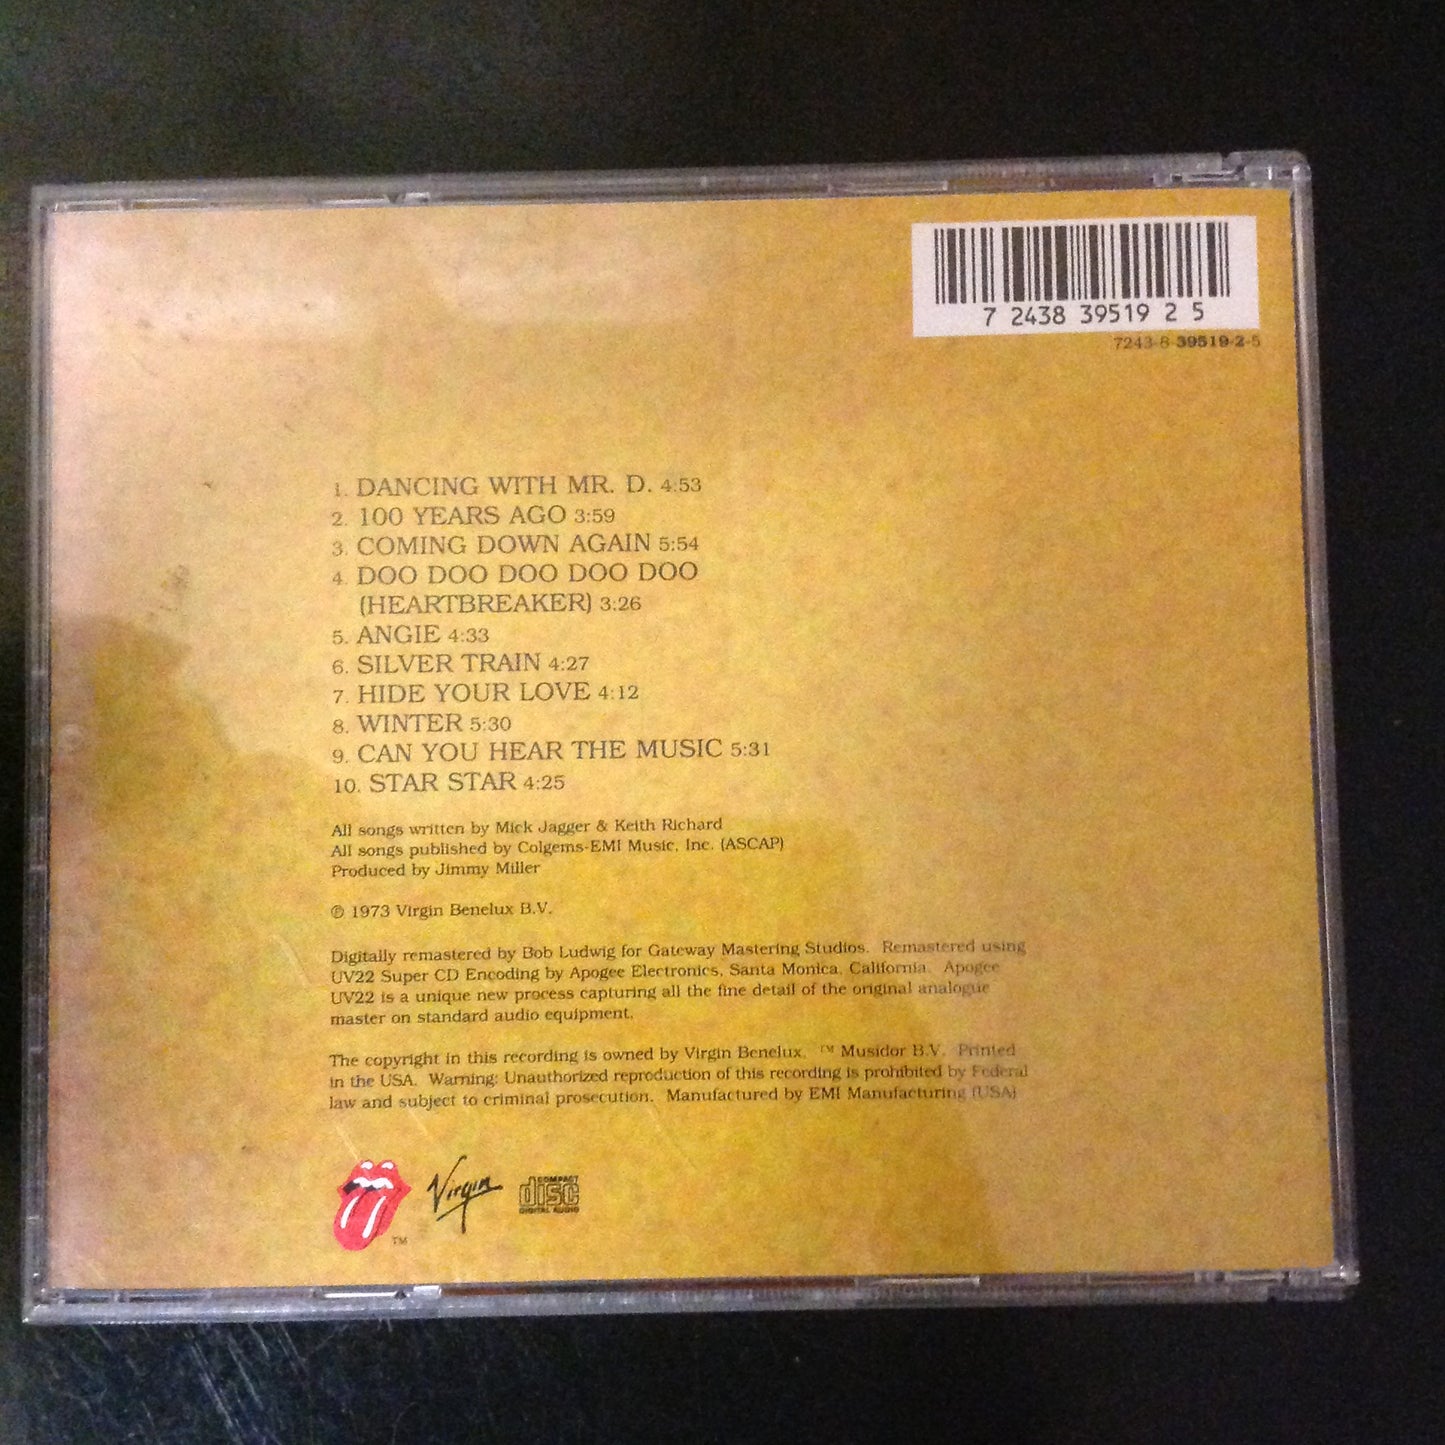 CD The Rolling Stones Goats Head Soup 7243-839519-2-5 Virgin